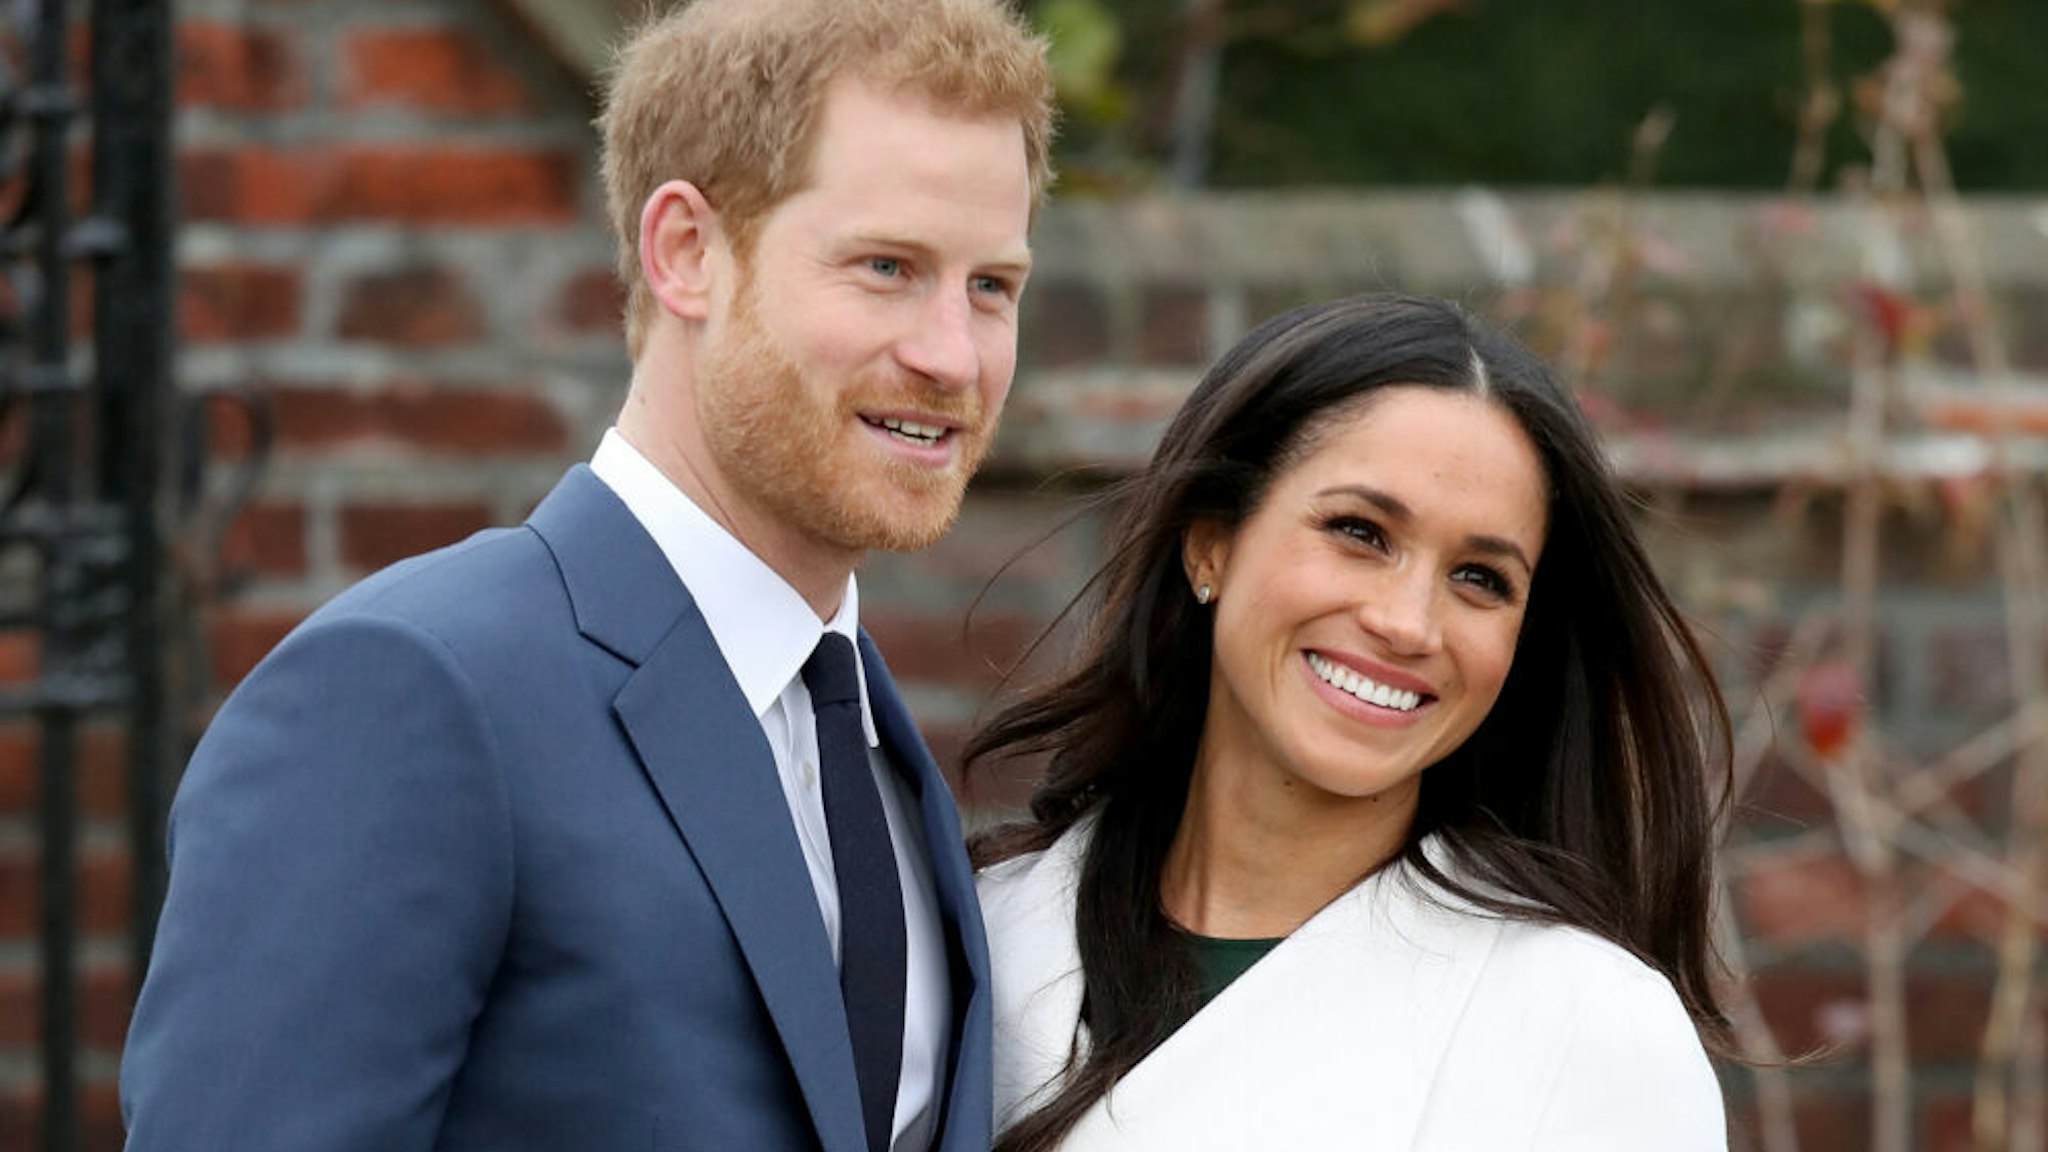 LONDON, ENGLAND - NOVEMBER 27: Prince Harry and actress Meghan Markle during an official photocall to announce their engagement at The Sunken Gardens at Kensington Palace on November 27, 2017 in London, England. Prince Harry and Meghan Markle have been a couple officially since November 2016 and are due to marry in Spring 2018.